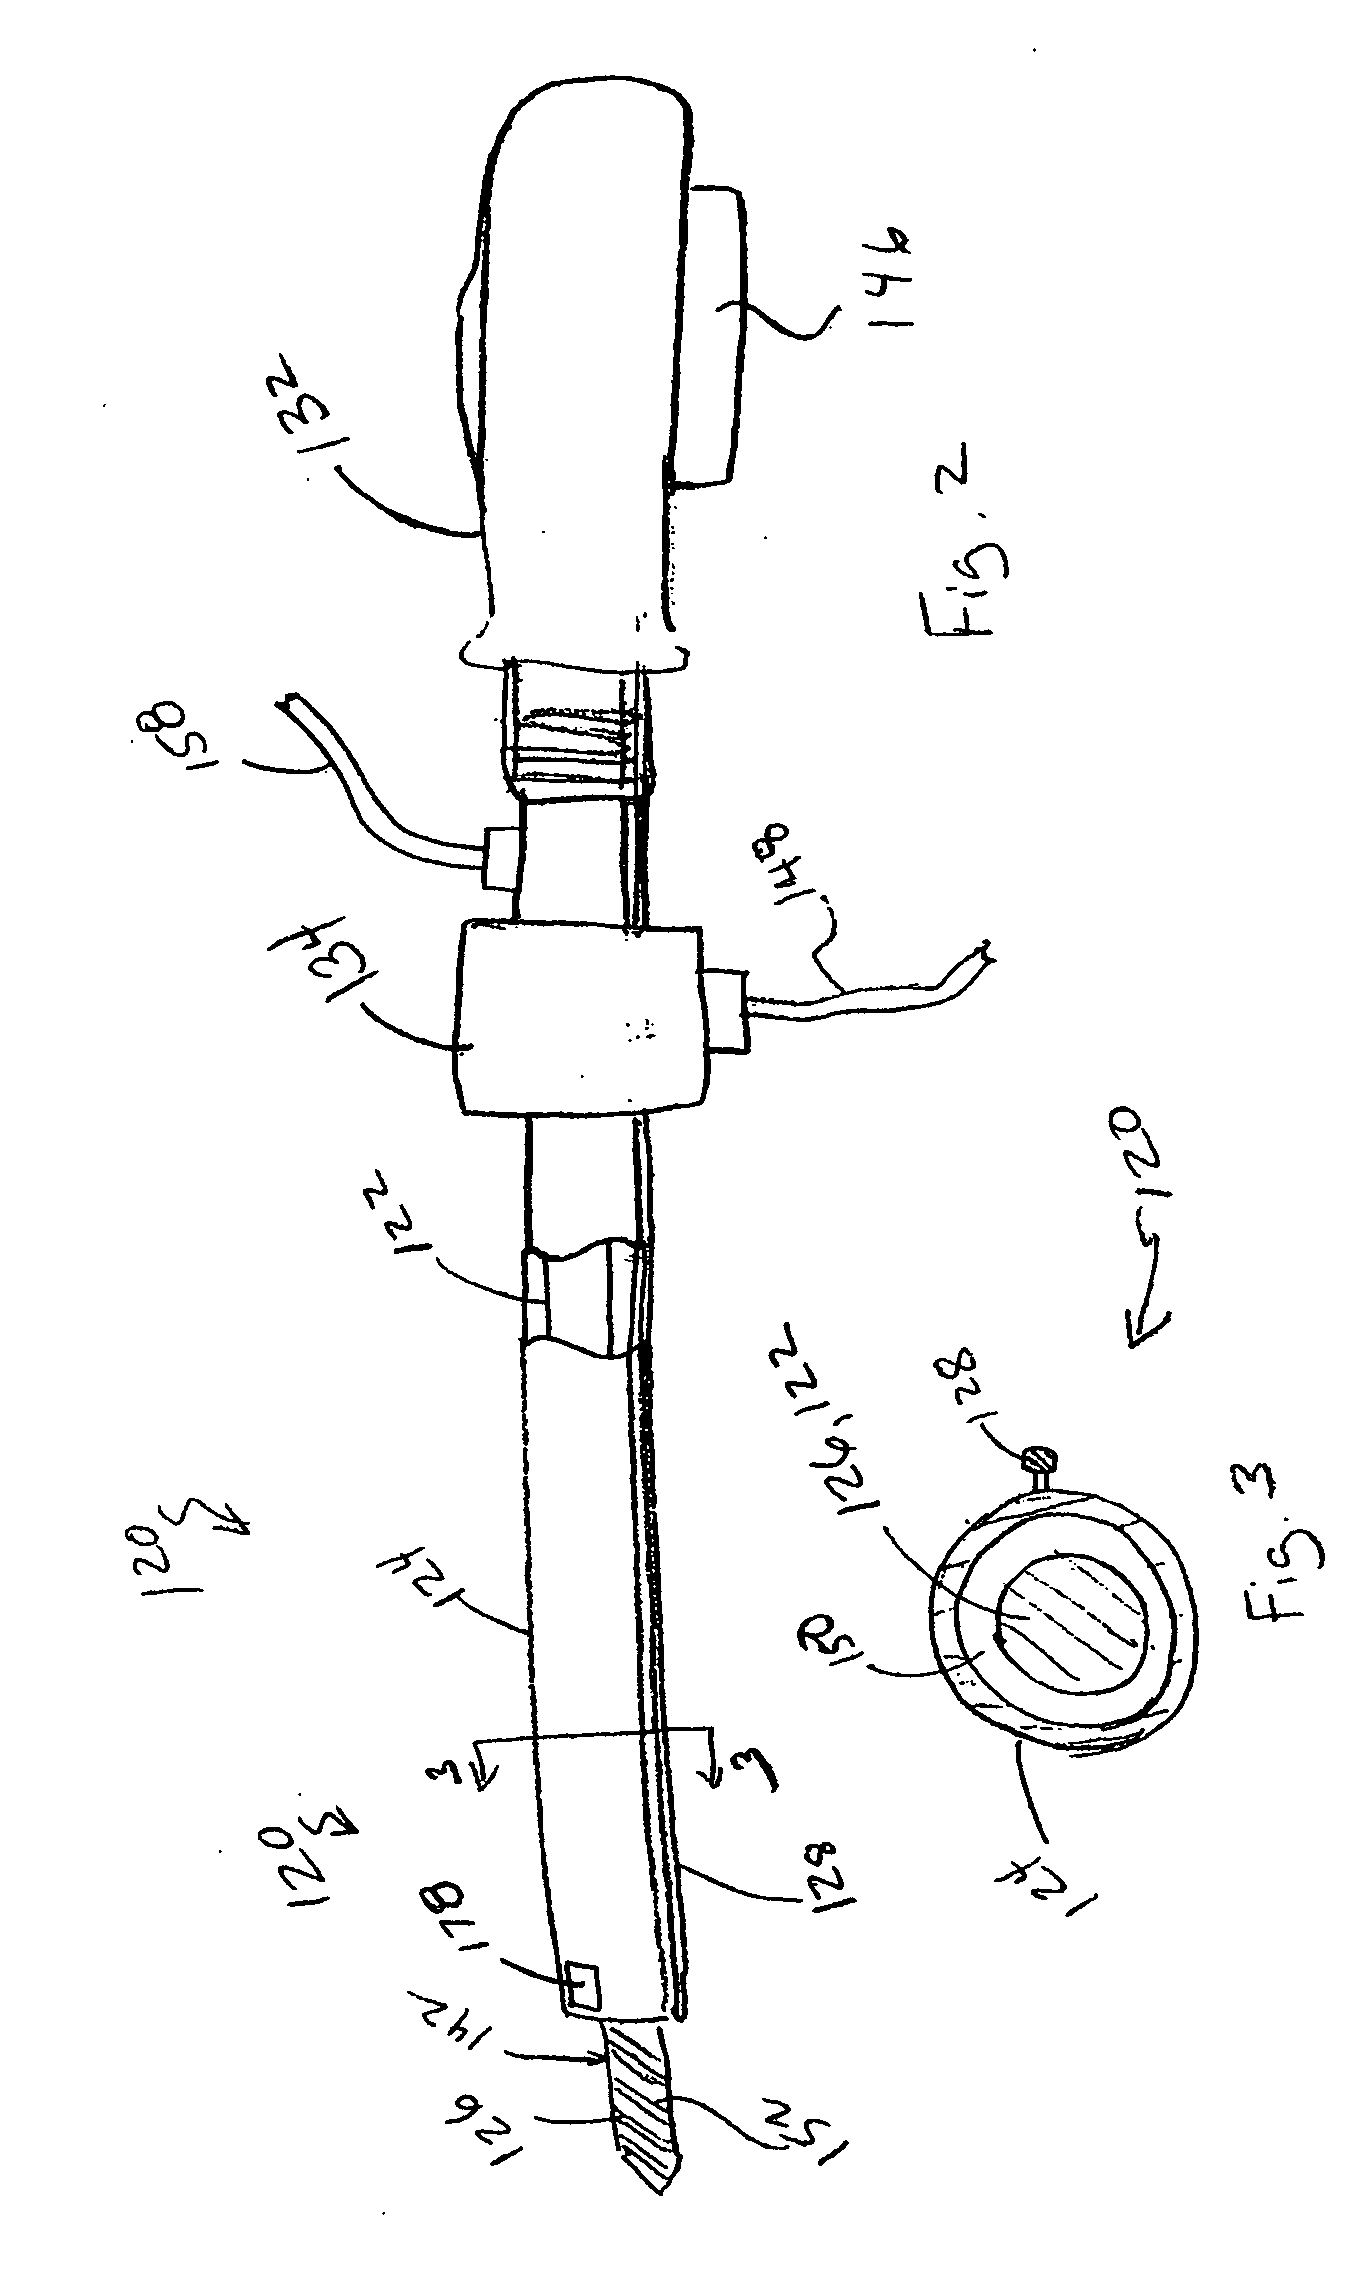 Tissue debulking device and method of using the same